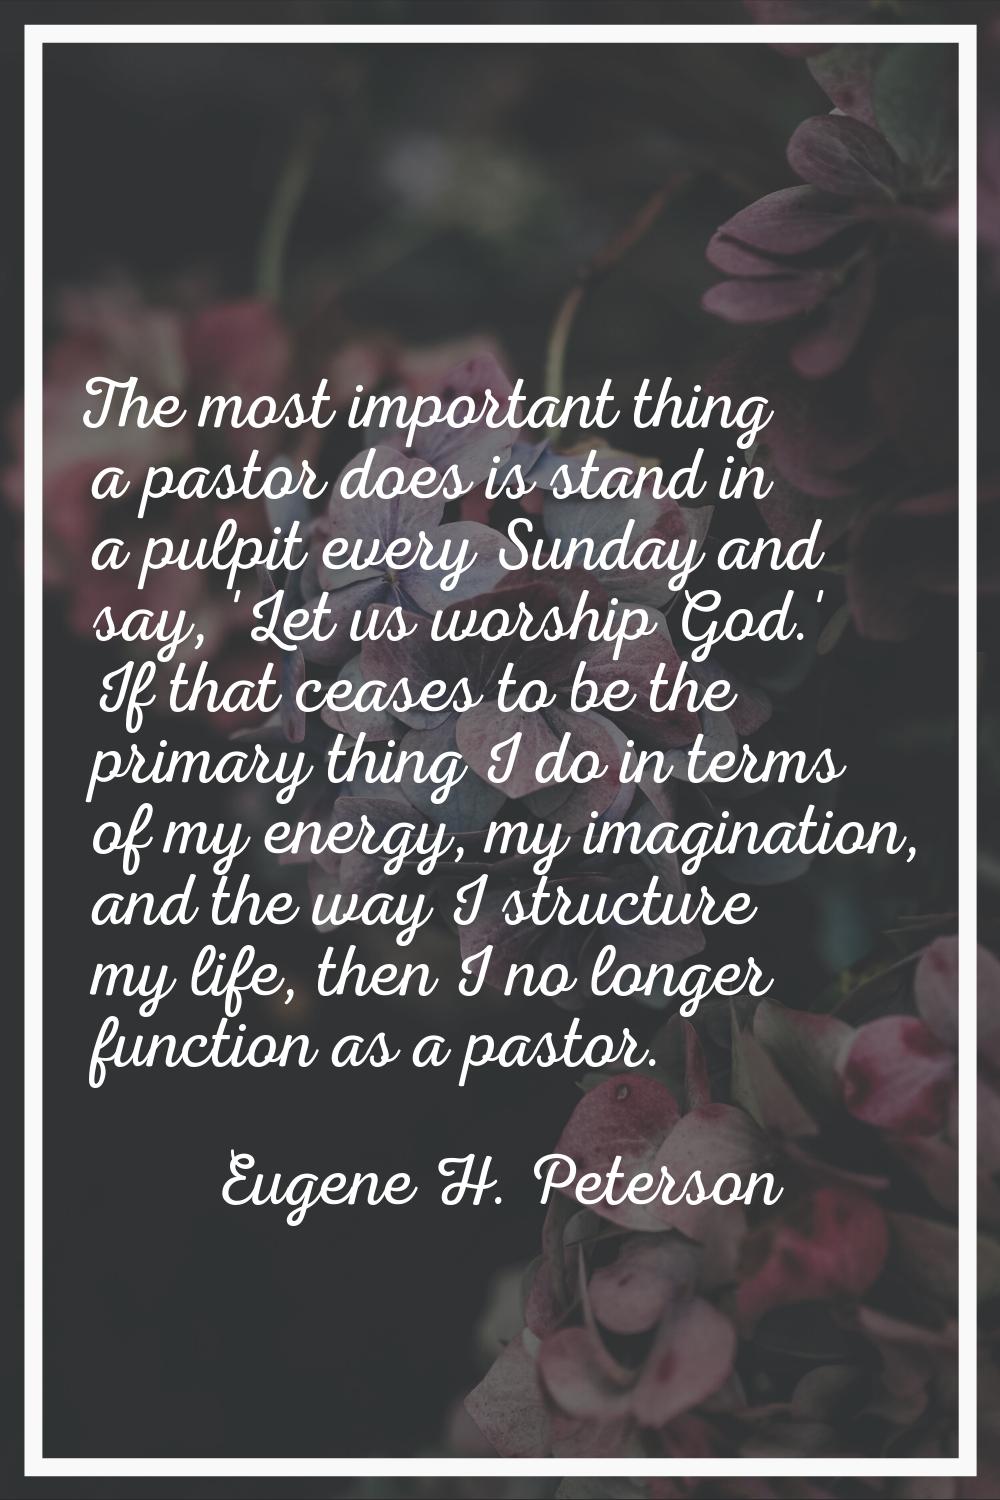 The most important thing a pastor does is stand in a pulpit every Sunday and say, 'Let us worship G